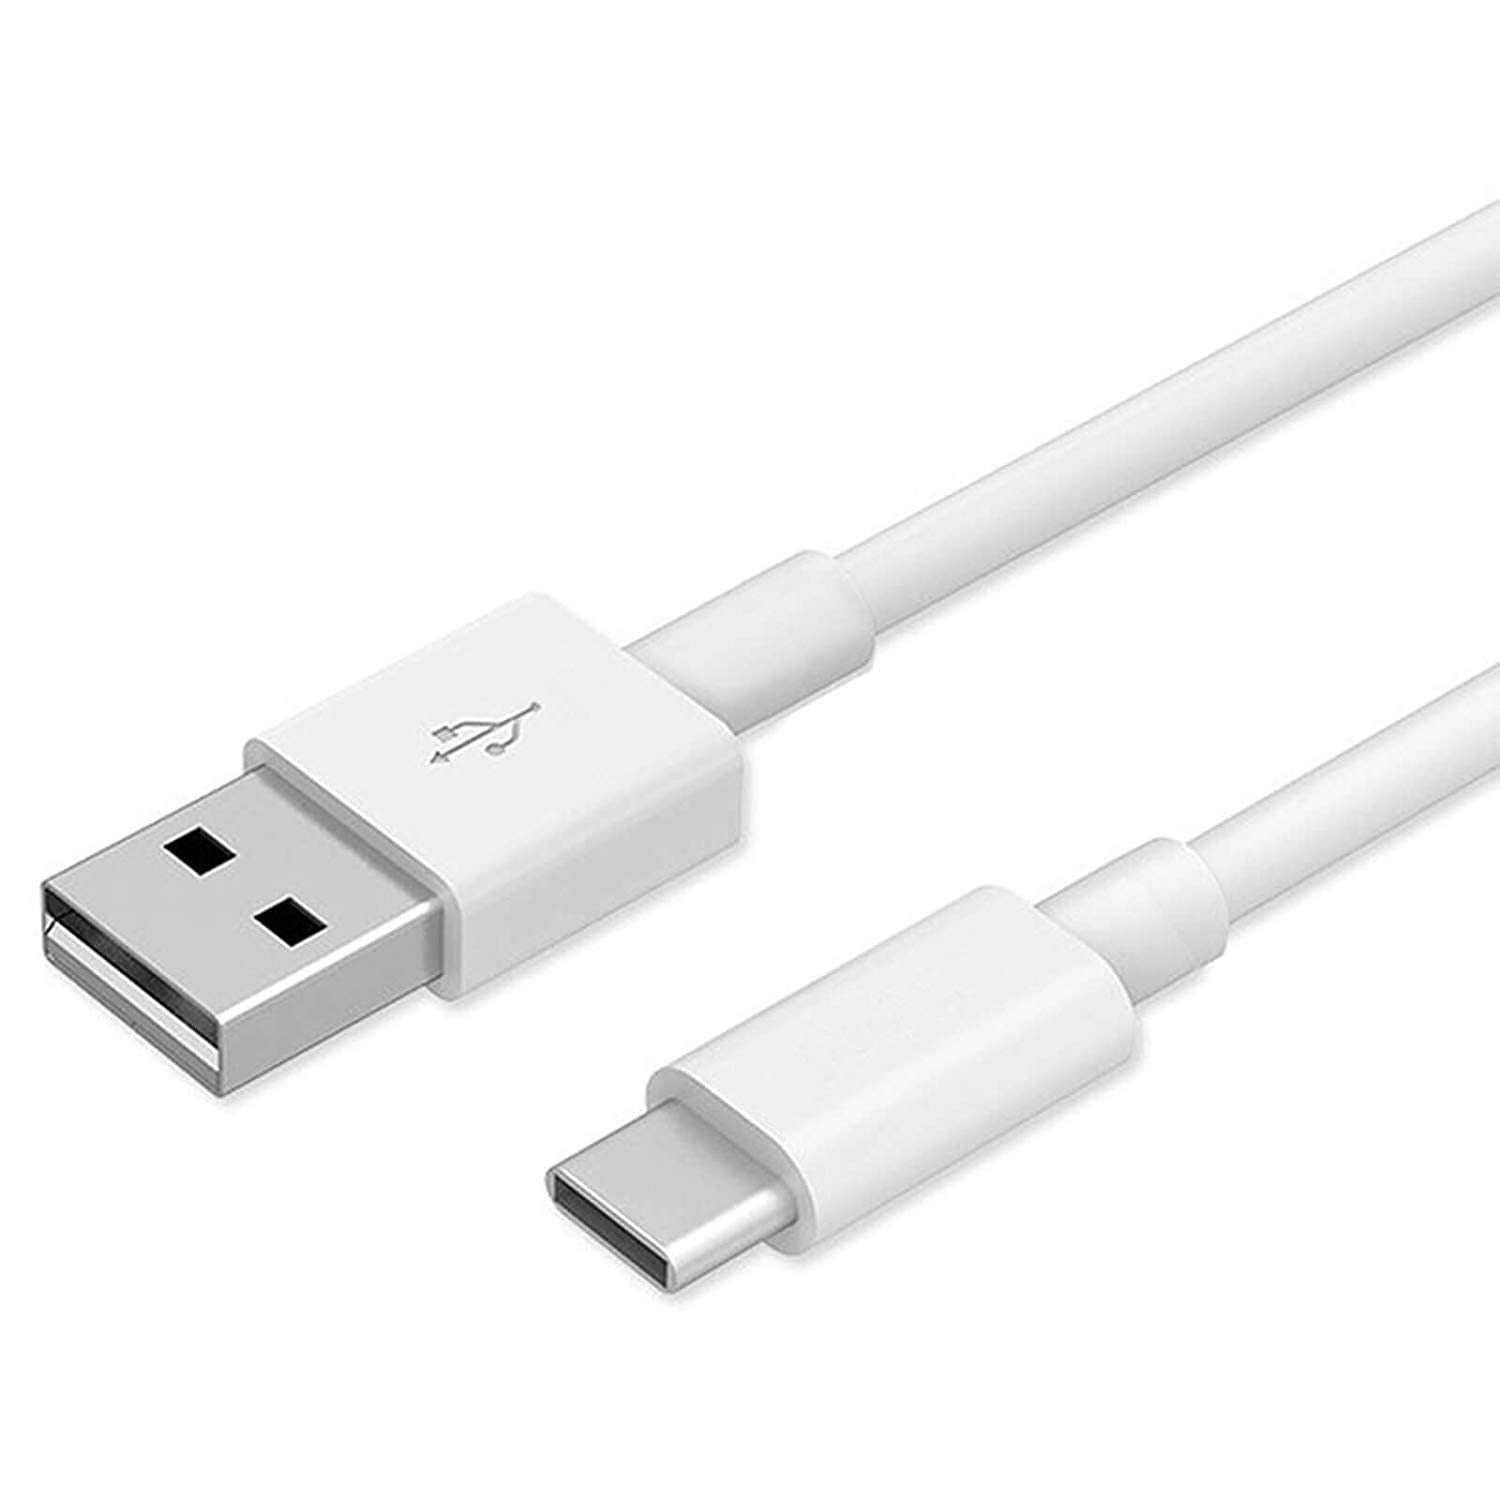 Samsung Galaxy A70 USB Cable Type C Charging Power Lead White - 2M - SmartPhoneGadgetUK